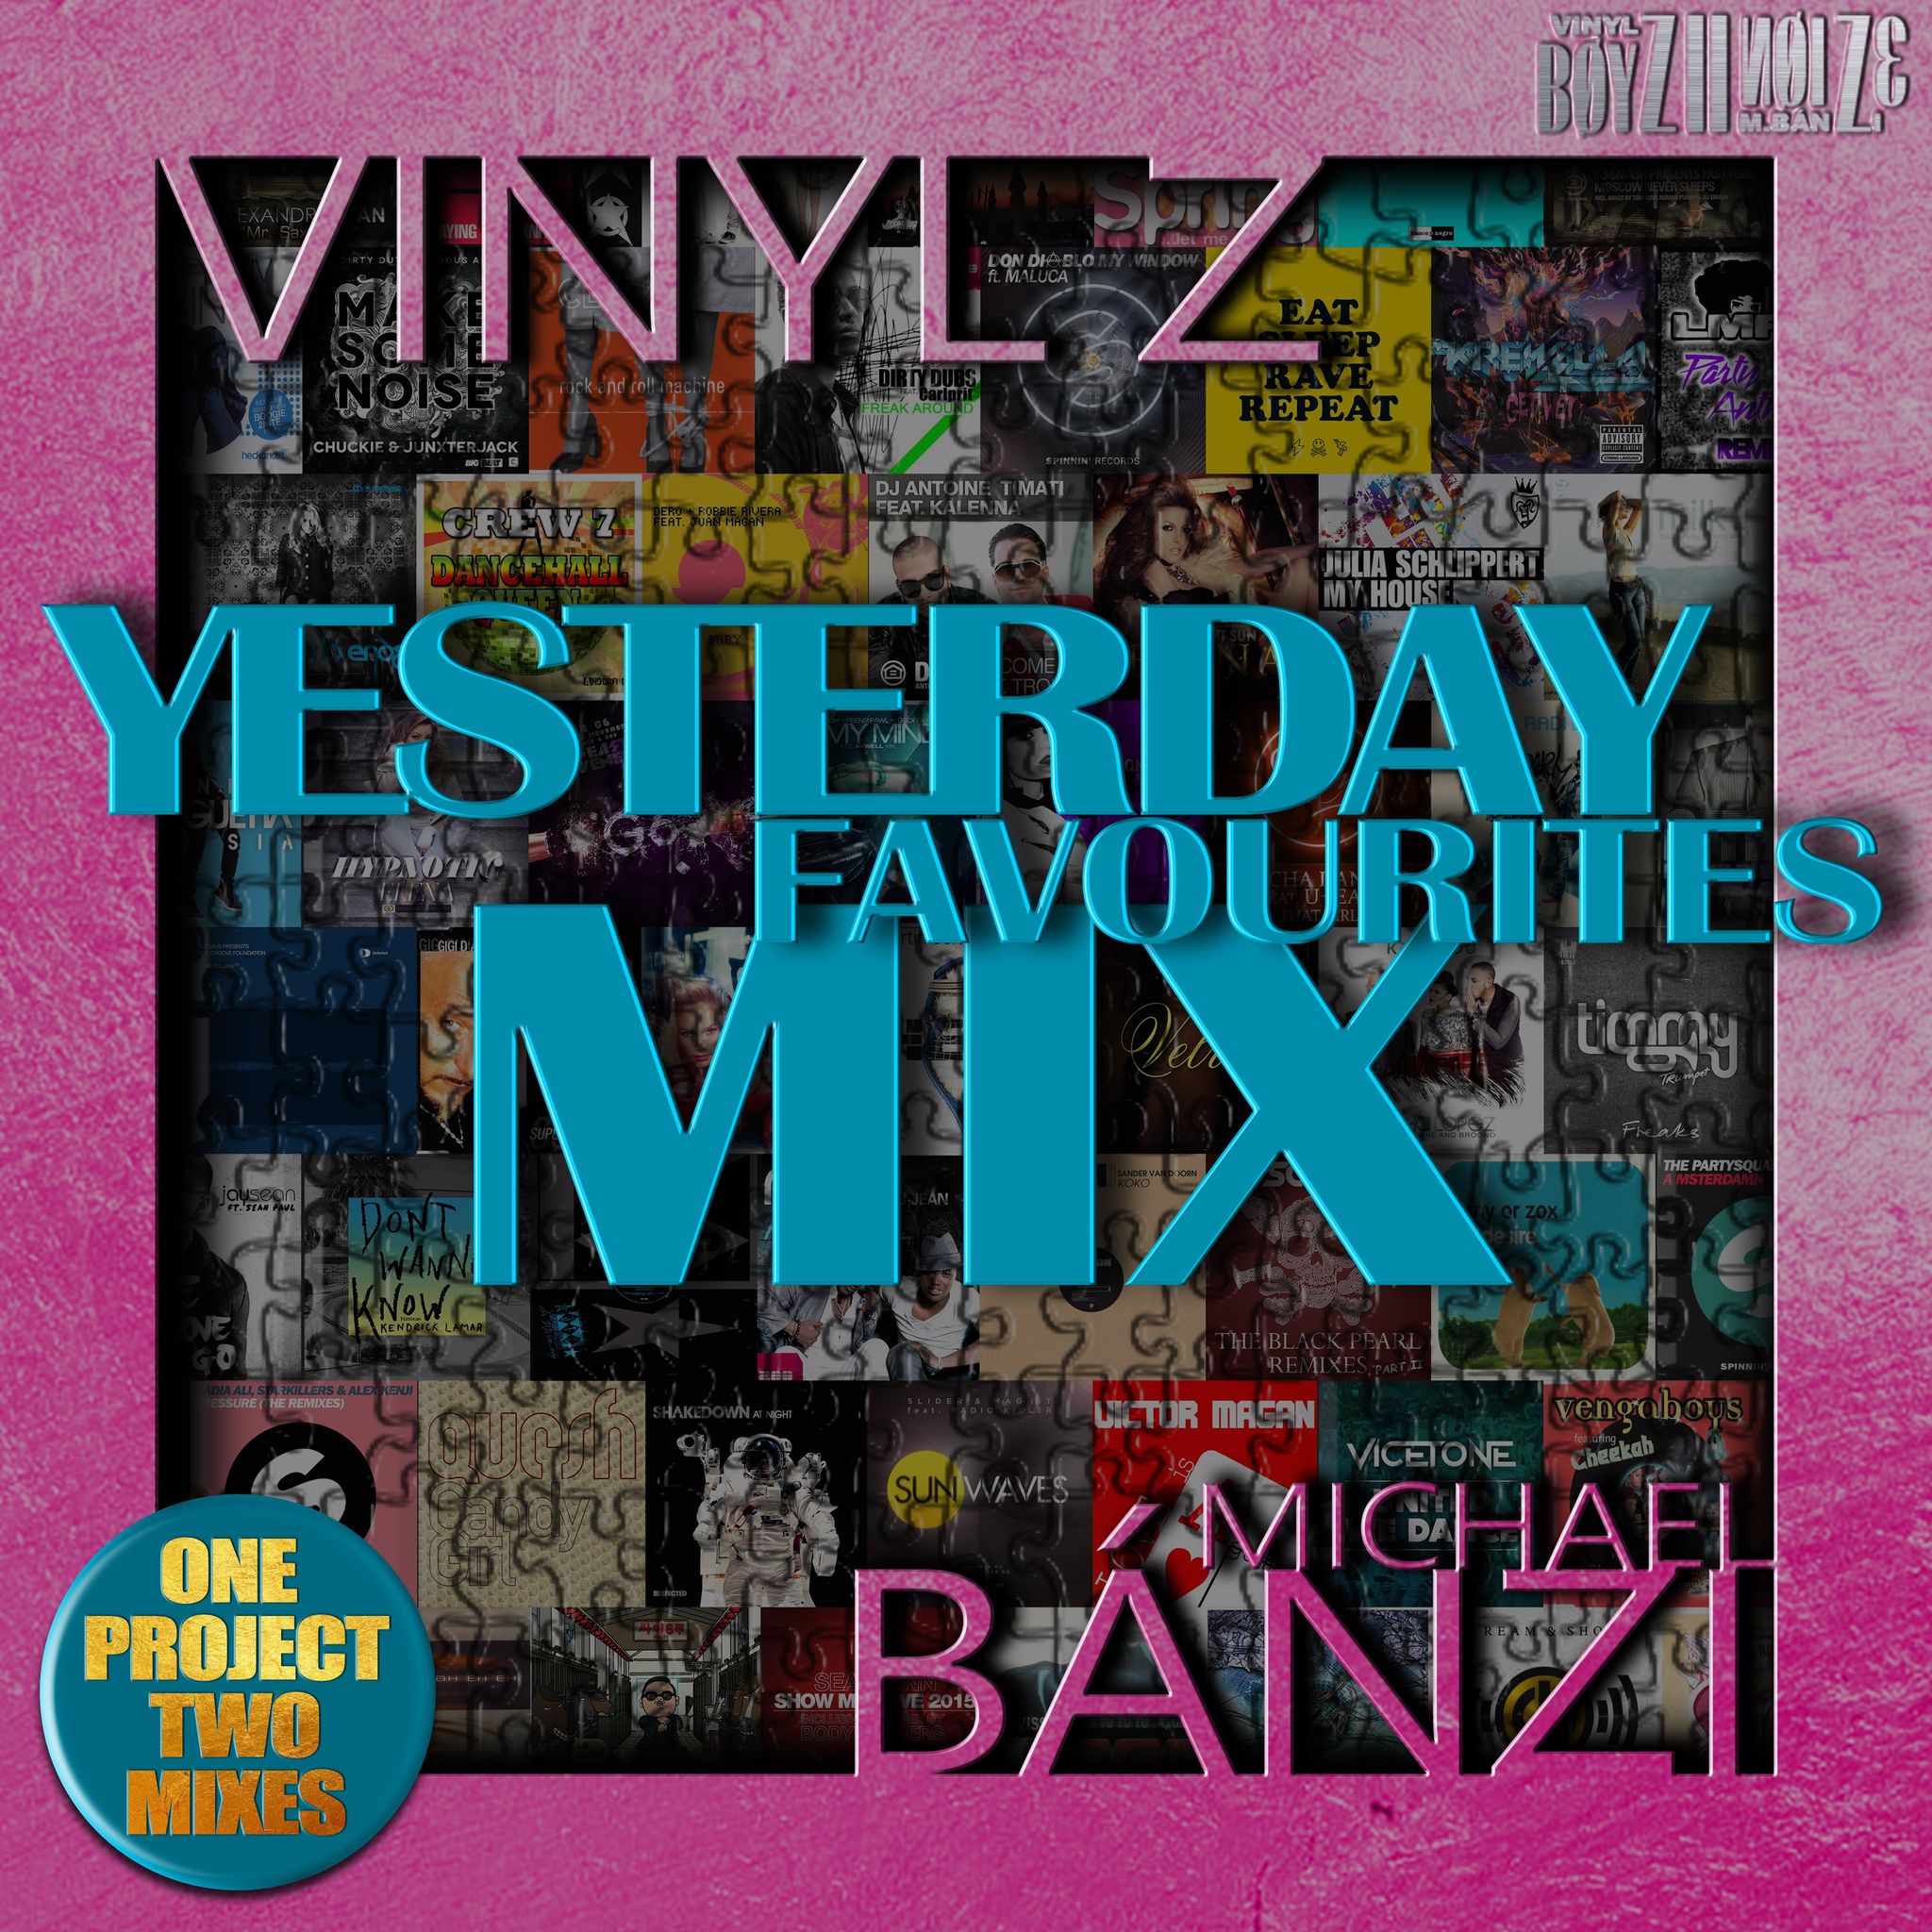 Yesterday Favourites Vol.1. 4444_bfabb8c2dcca